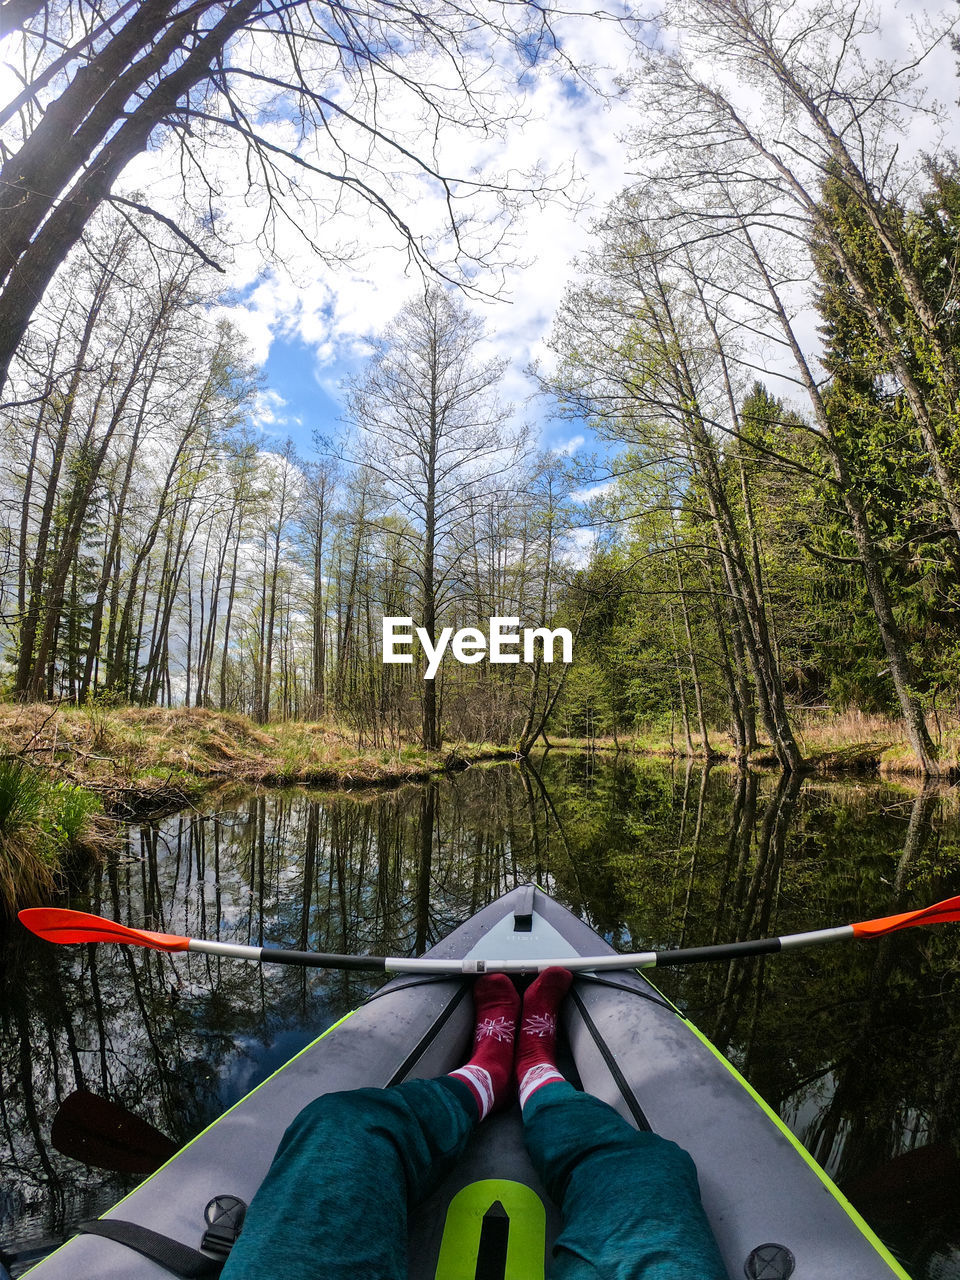 Low section of person in boat against trees in forest